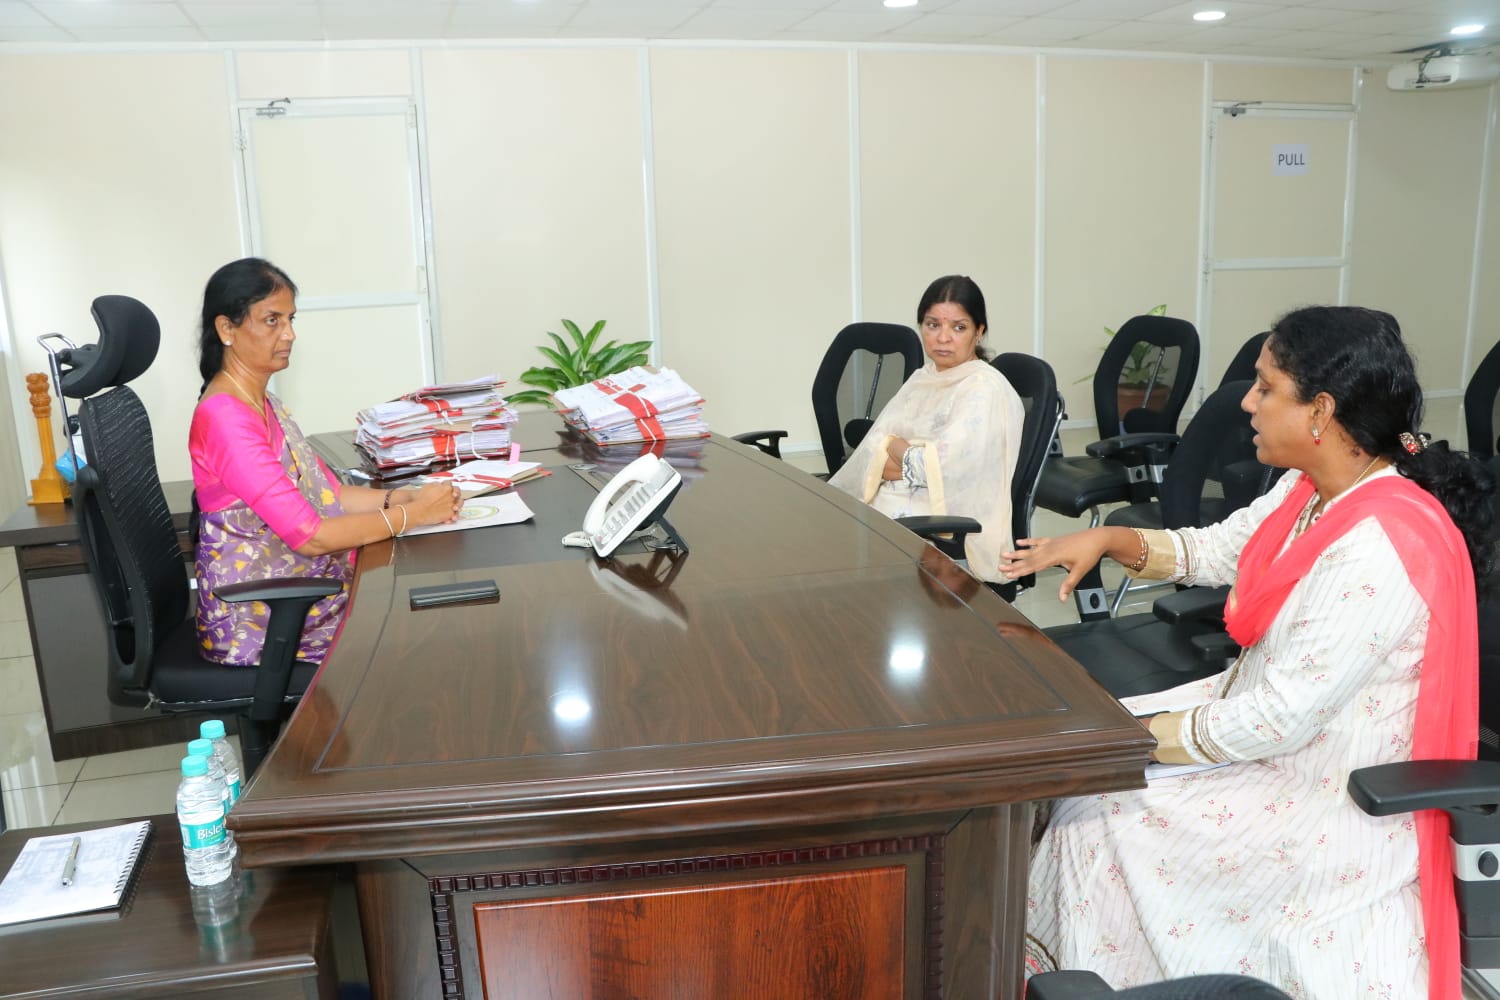 Telangana Education Minister Sabitha Indira Reddy (on the left) met the officials. (Sabitha Indira Reddy/Twitter)